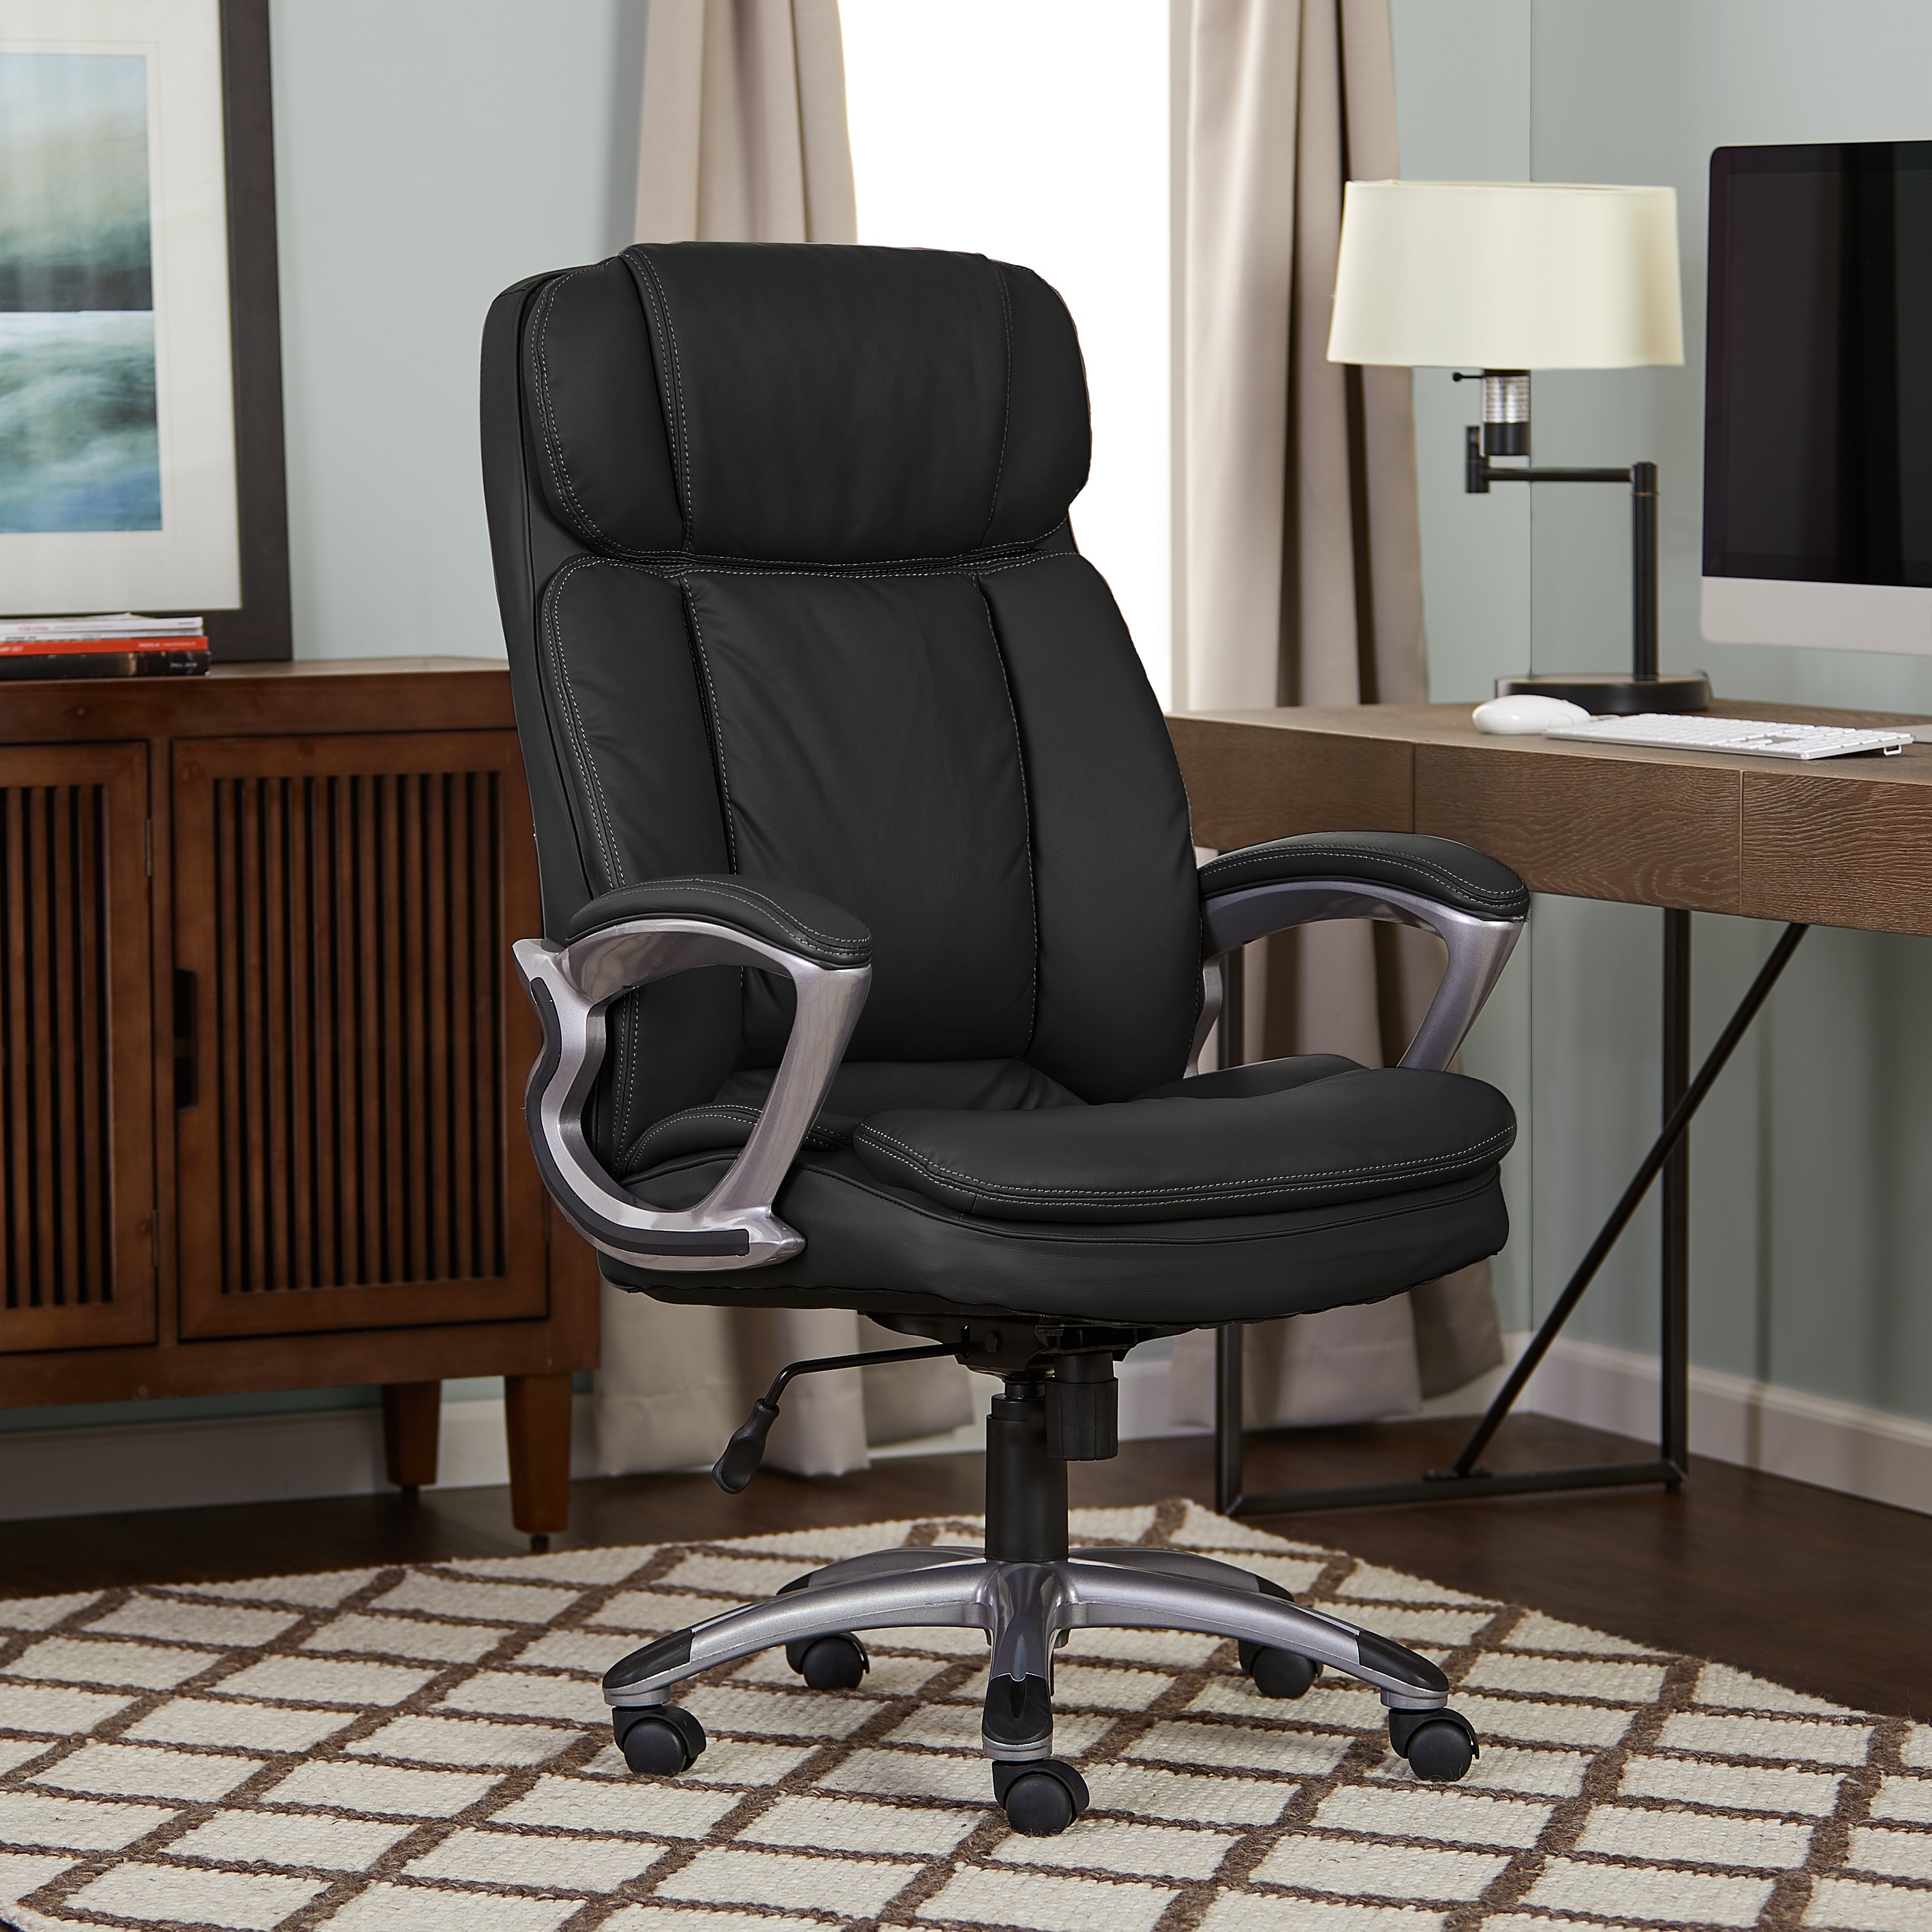 Shop Serta Executive Smooth Black Big and Tall Puresoft Faux Leather ...